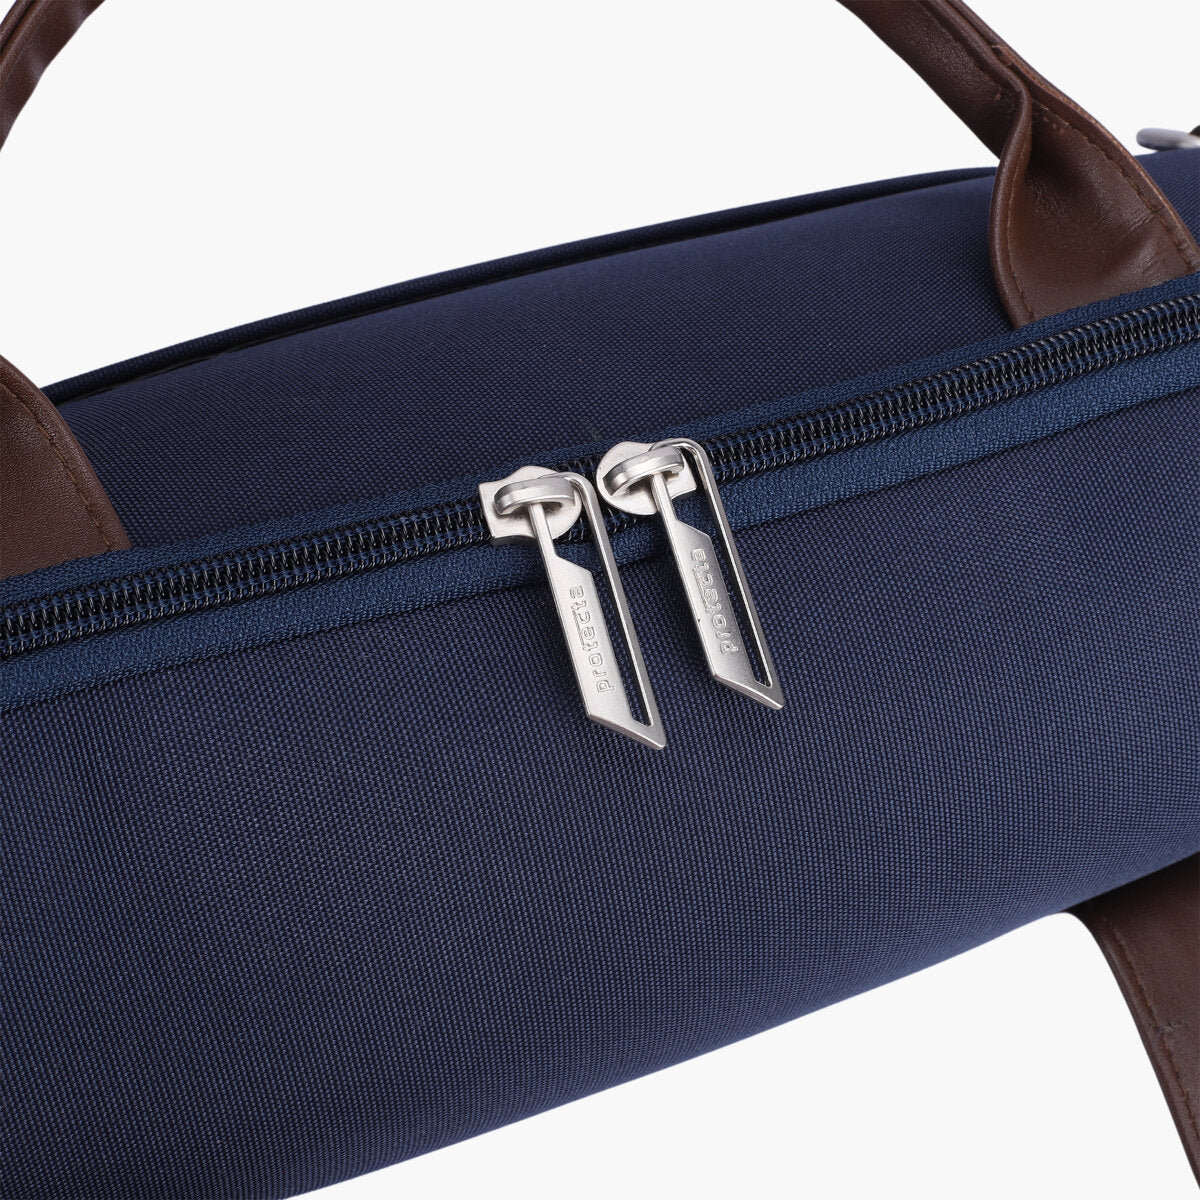 Blue | Protecta Quest Anti-Theft Office Laptop Bag - 8